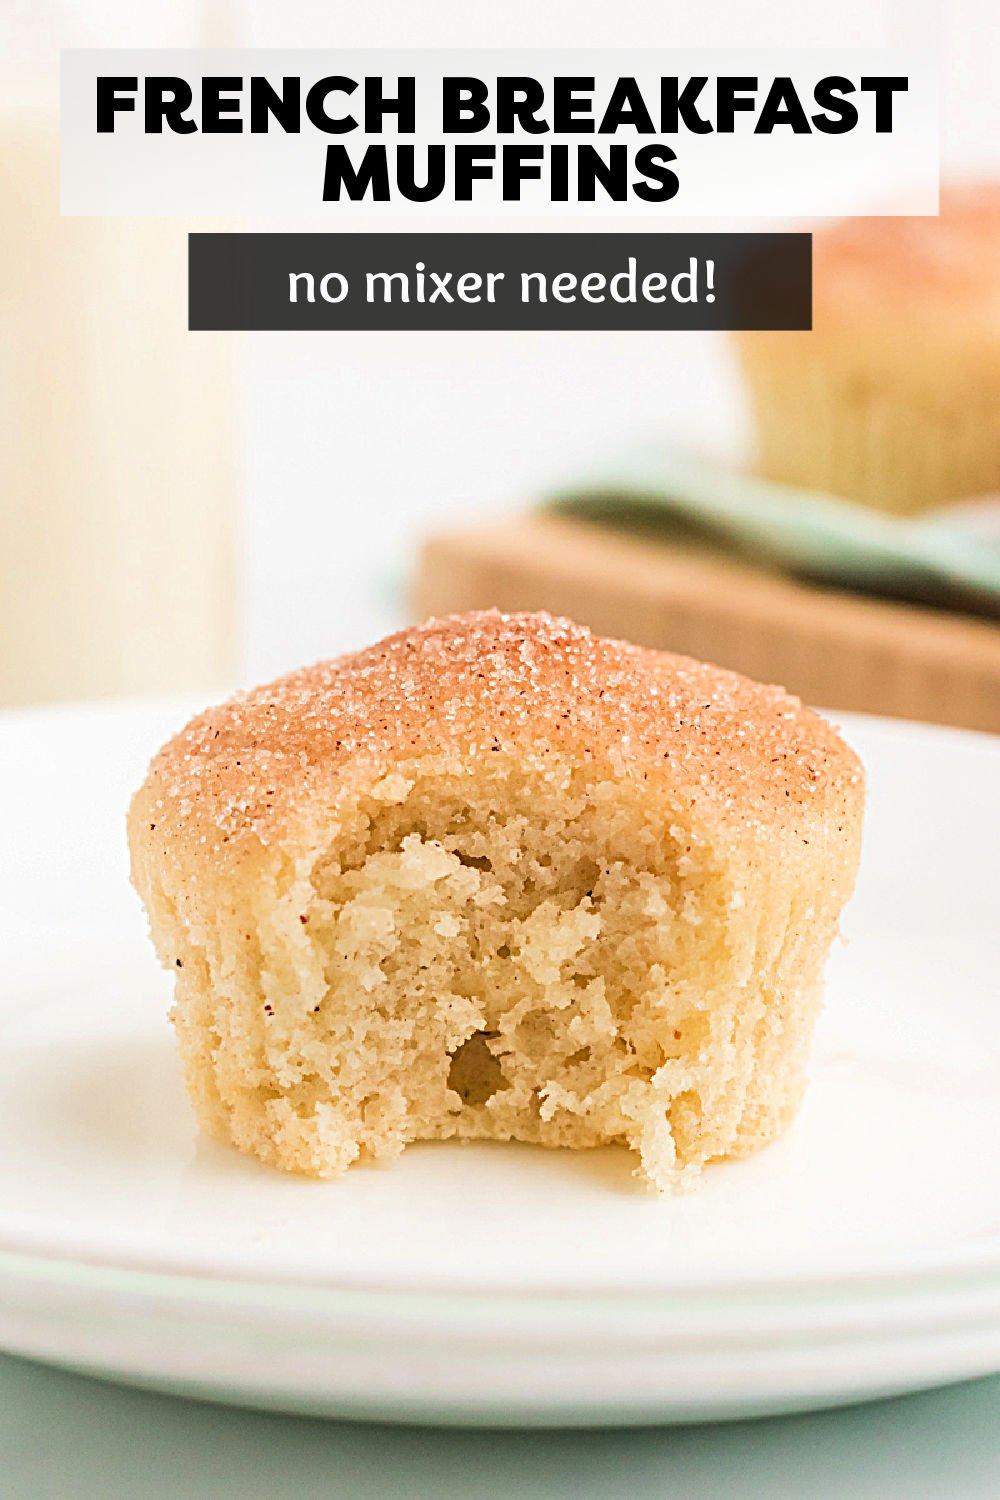 These French Breakfast Muffins, aka French Breakfast Puffs, are little bites of heaven. Imagine biting into a tender vanilla muffin that’s been soaked in hot melted butter and then rolled in cinnamon and sugar for the perfect amount of sweetness. It’s like the perfect Snickerdoodle muffin recipe. | www.persnicketyplates.com